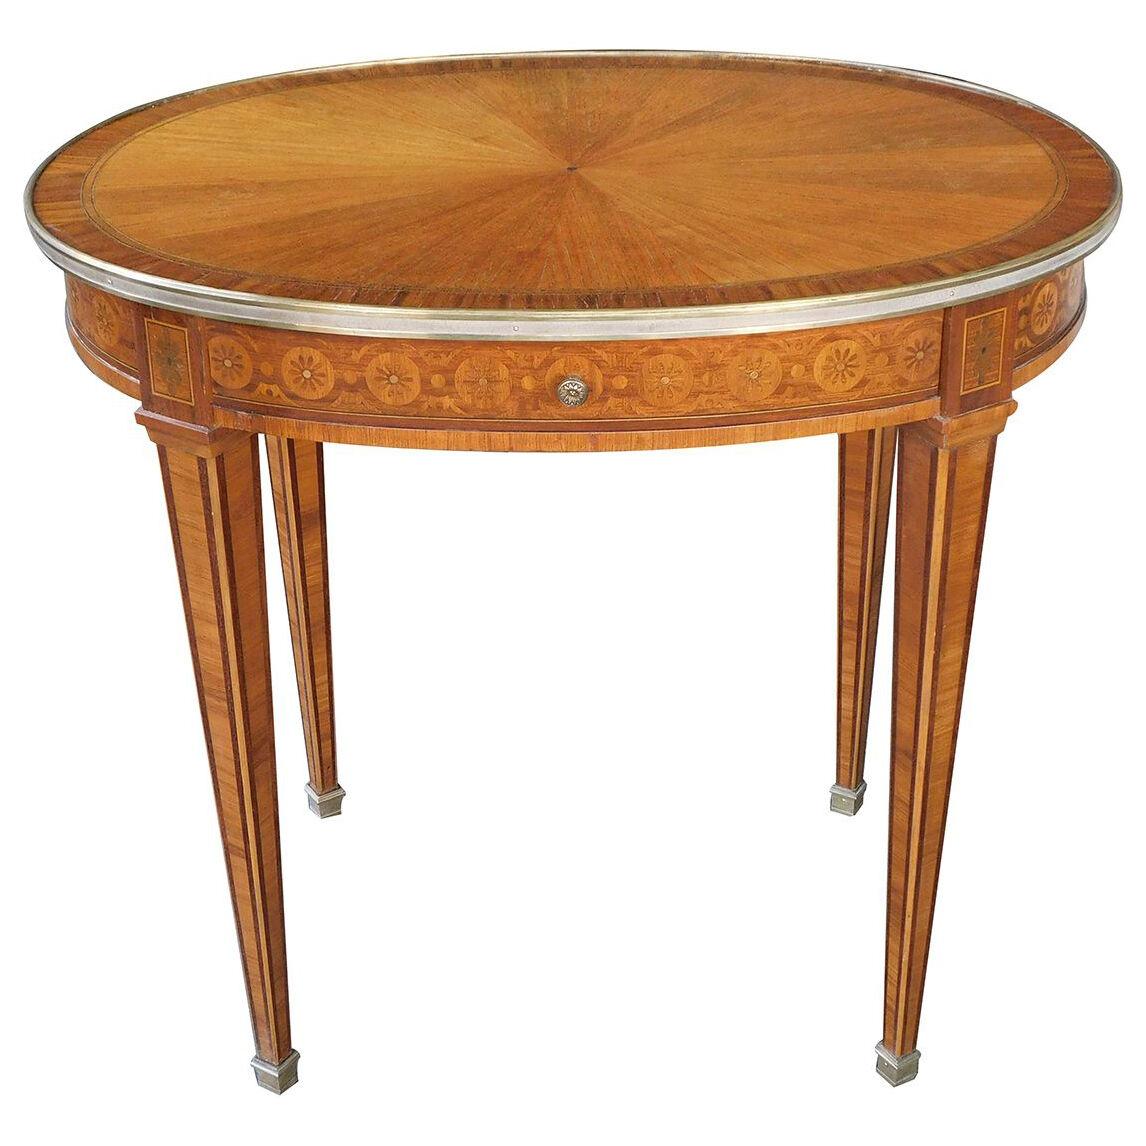 French Louis XVI style marquetry mahogany single-drawer oval side table